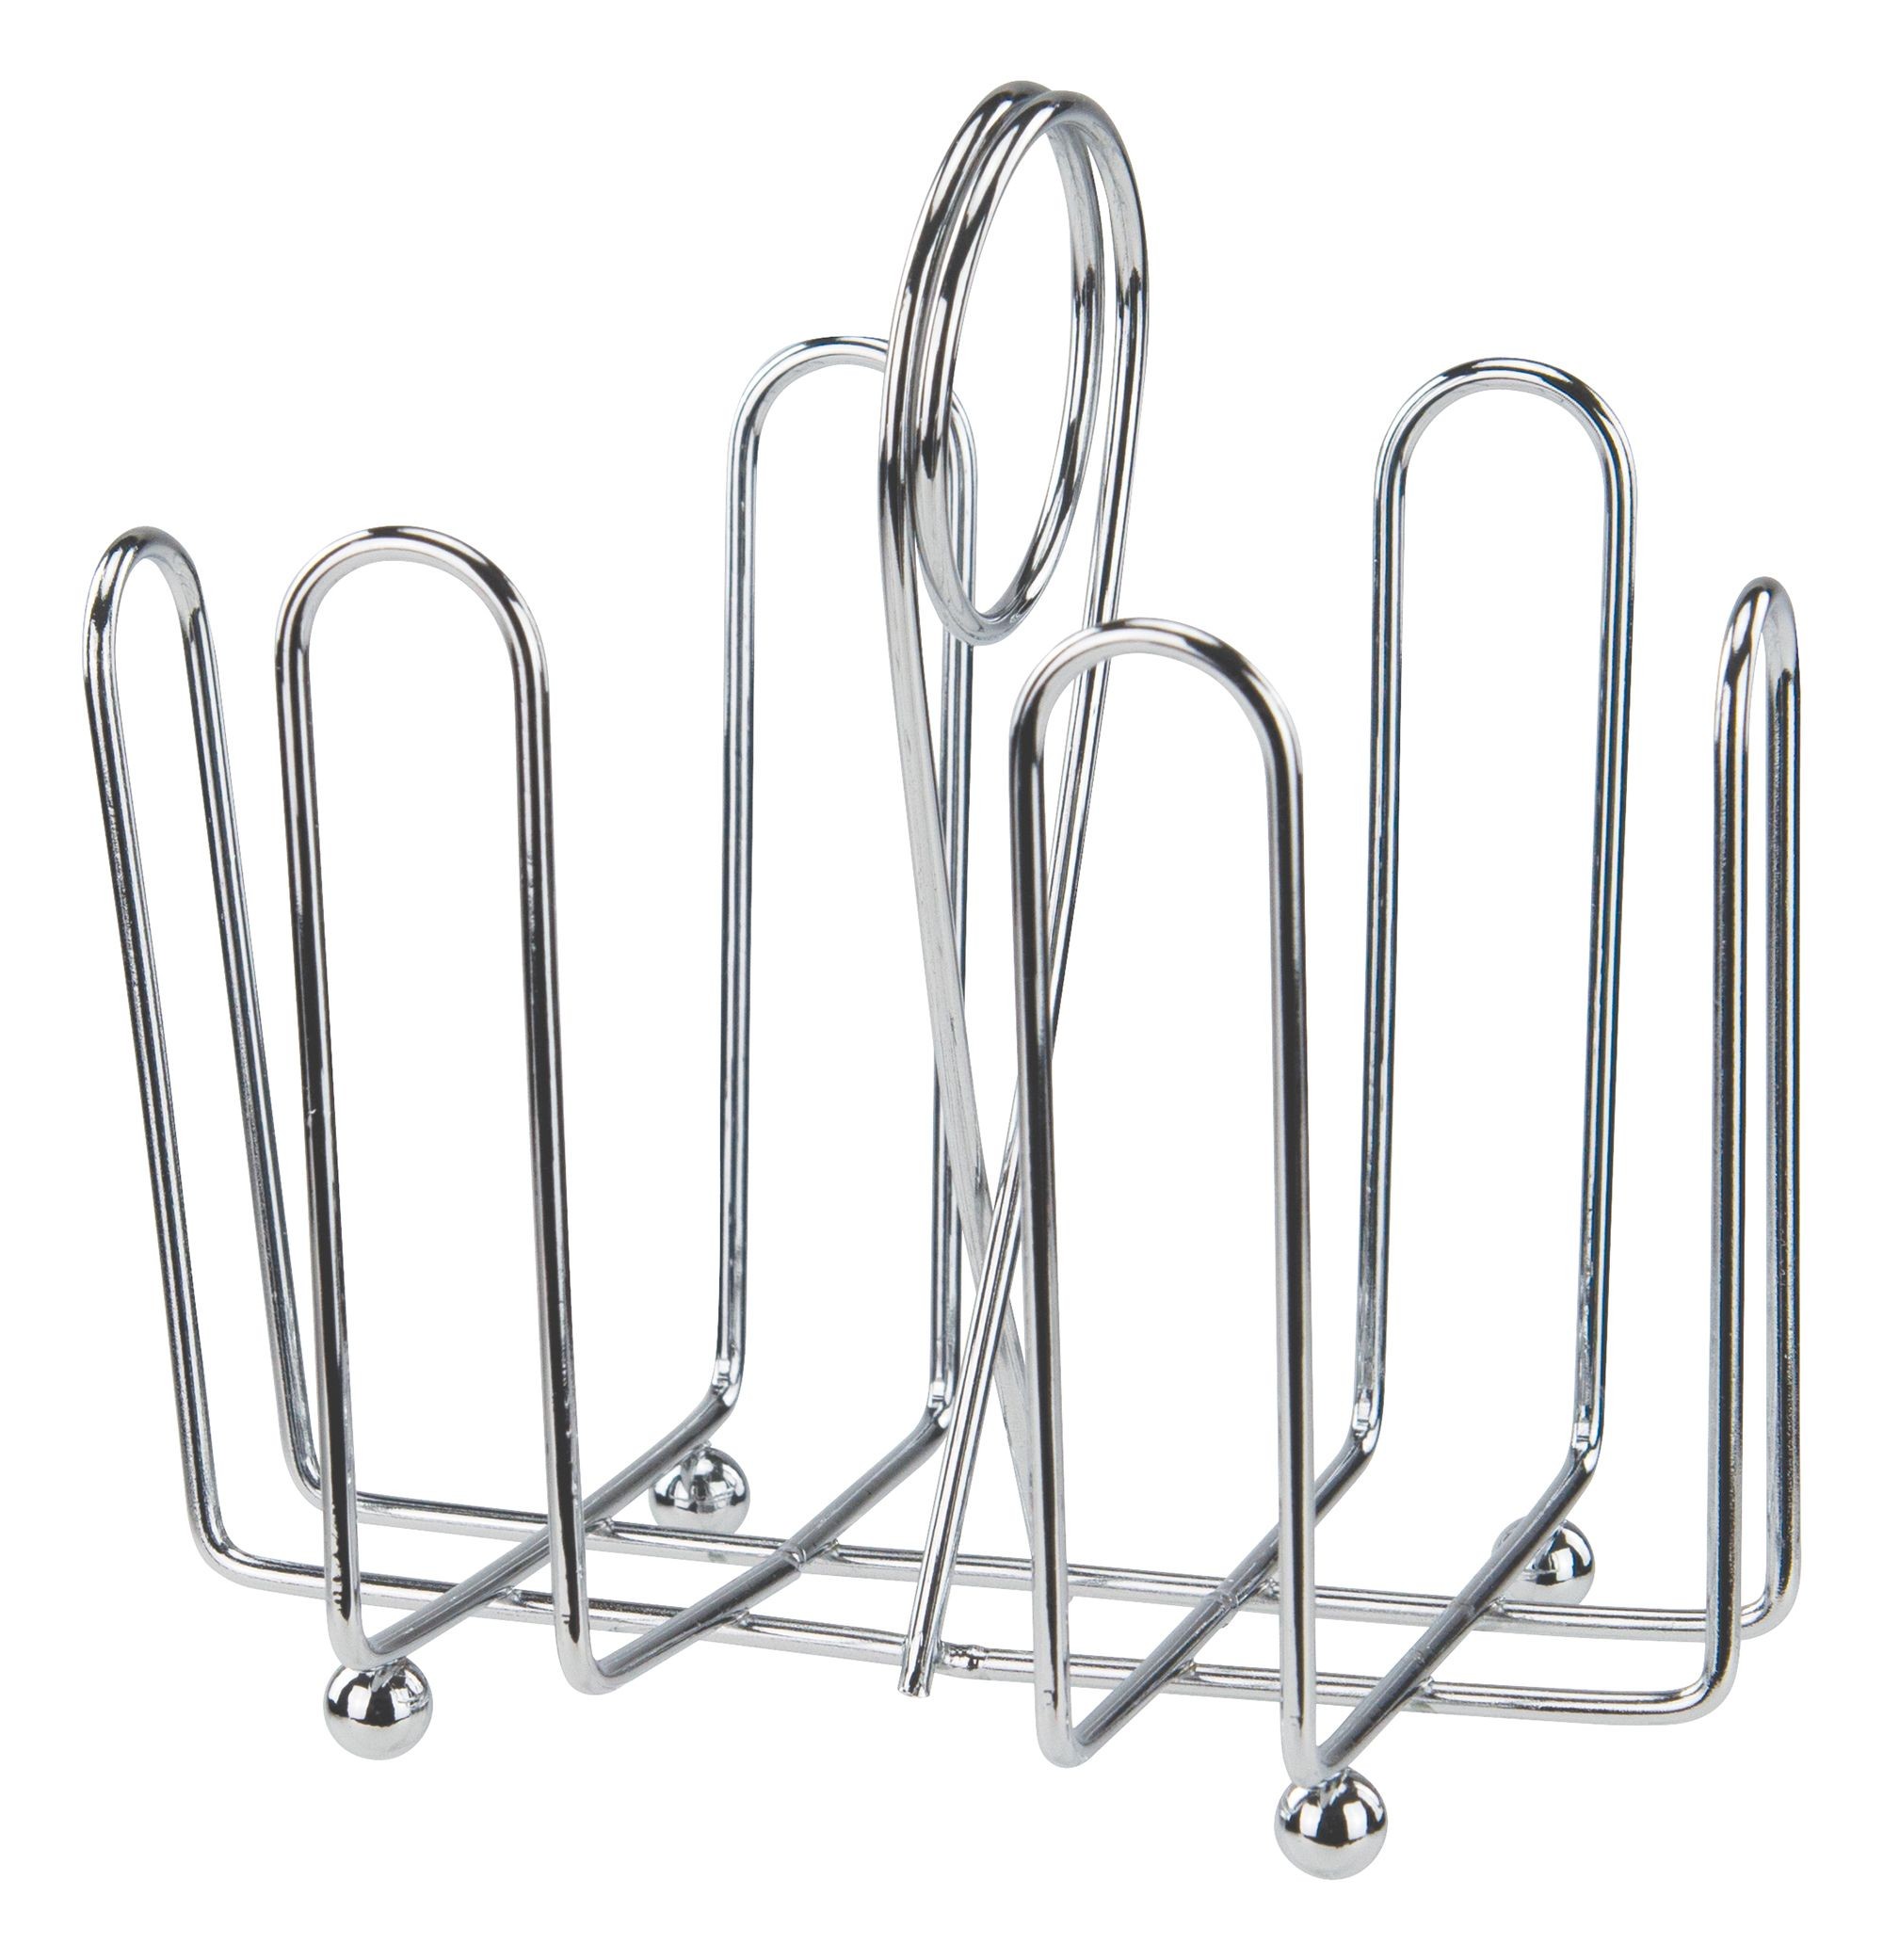 Winco WH-2 Sugar Packet Holder Rack with Chrome-Plated Wire and Ball Feet